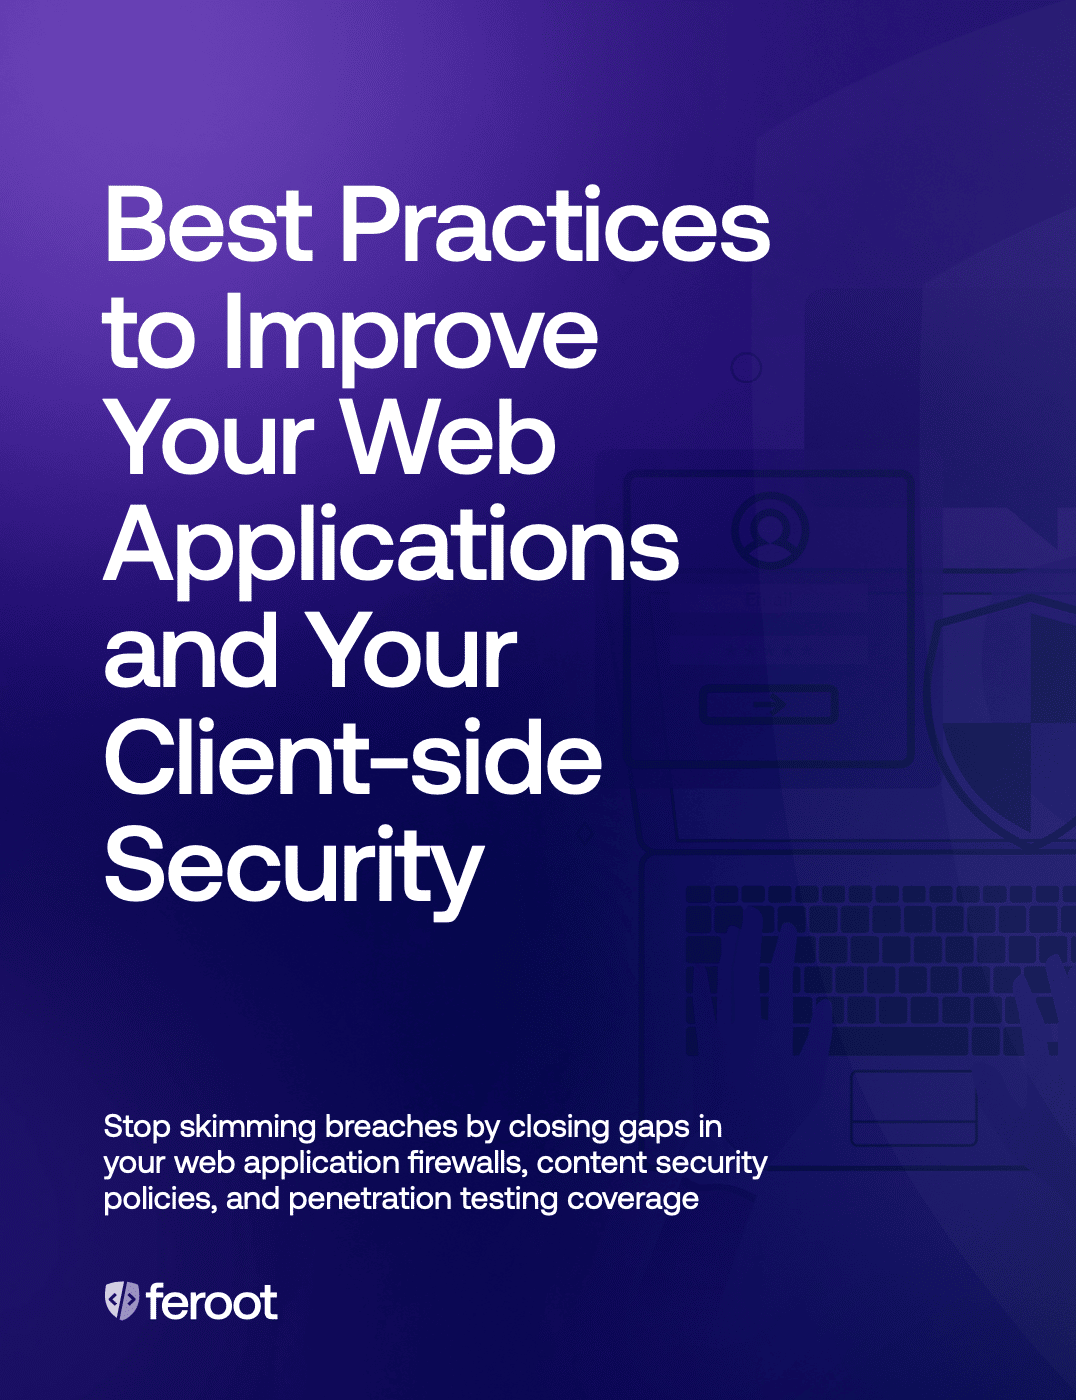 Best Practices: Improve Your Web Applications and Your Client-side Security